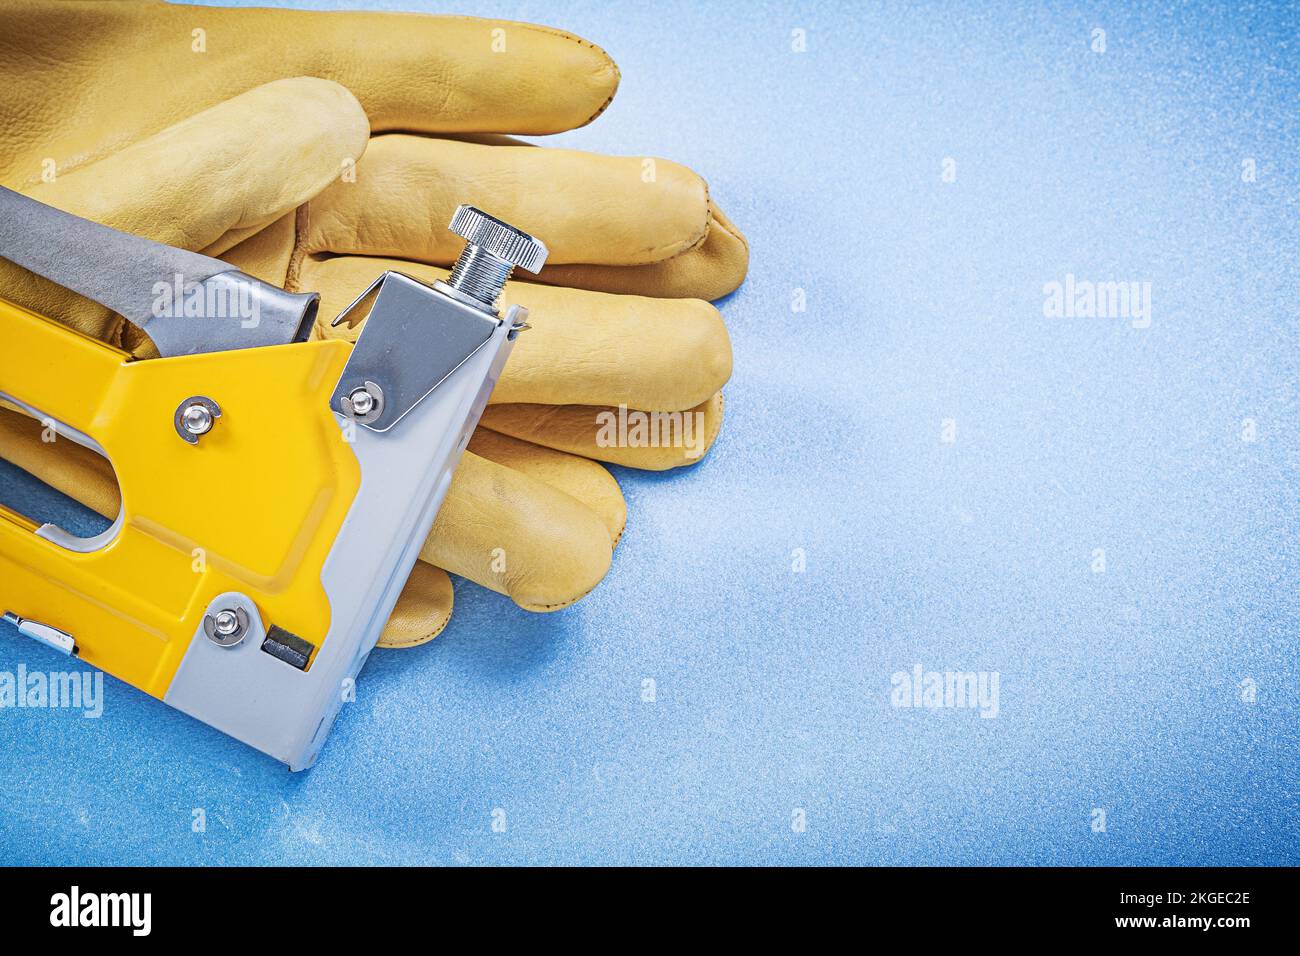 Leather safety gloves yellow construction stapler on blue background. Stock Photo